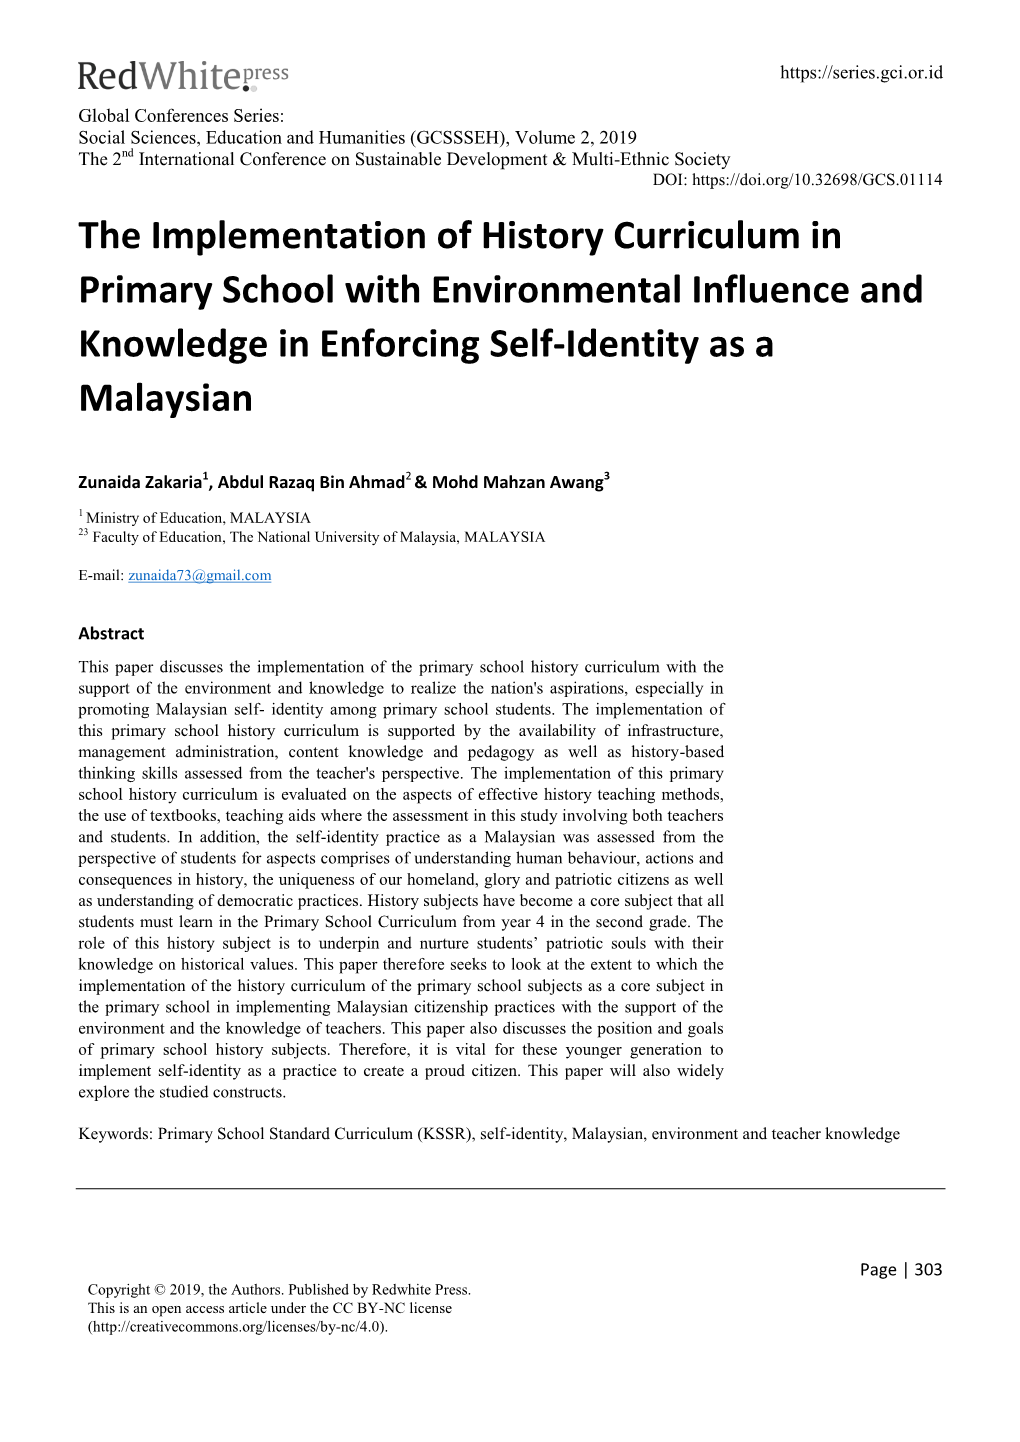 The Implementation of History Curriculum in Primary School with Environmental Influence and Knowledge in Enforcing Self-Identity As a Malaysian